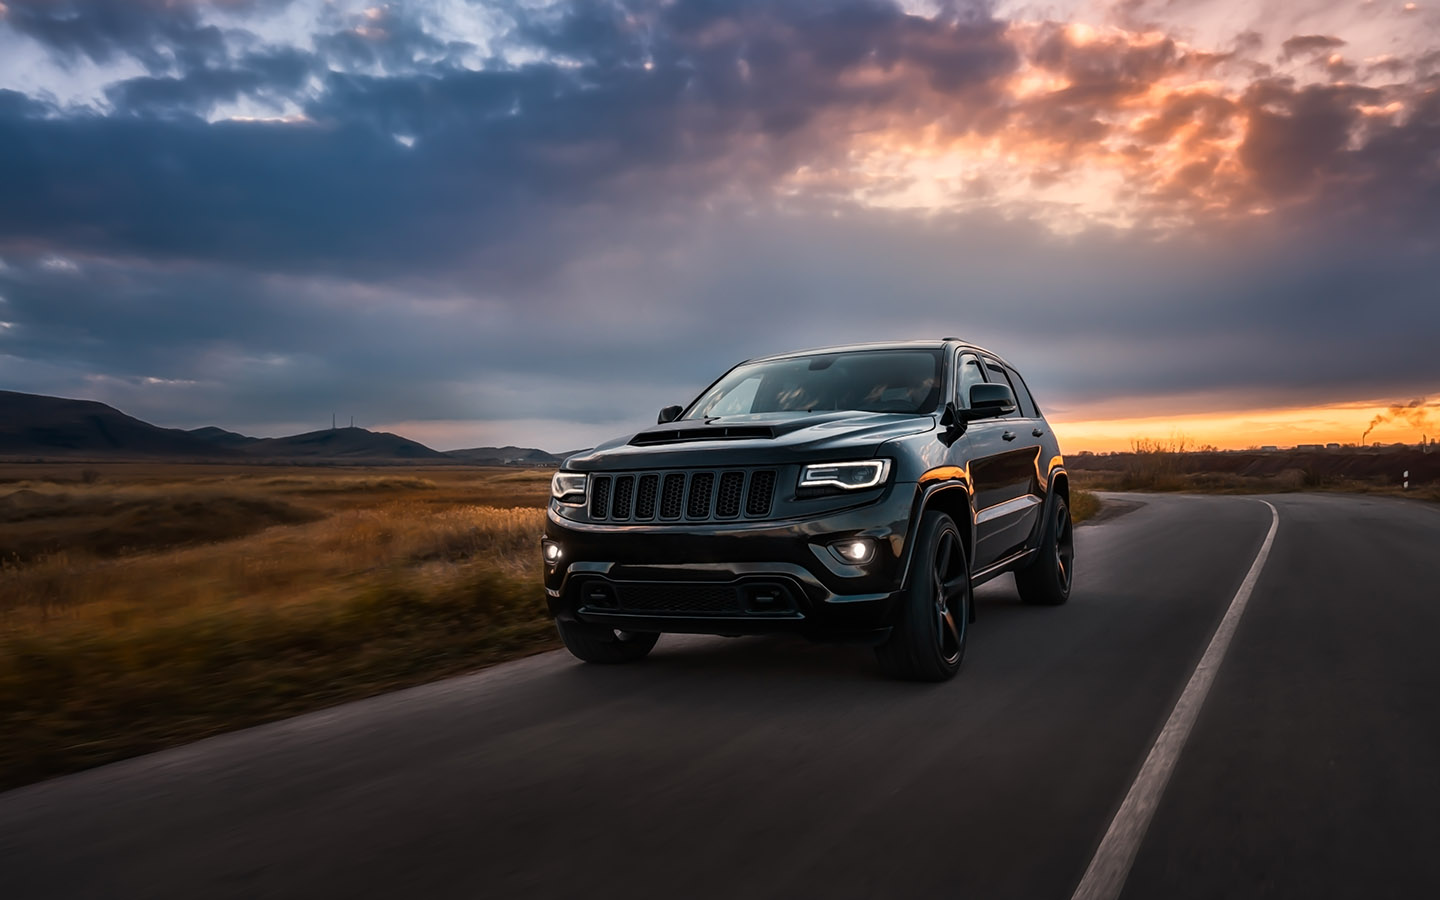 The Jeep Grand Cherokee is another popular used car by Jeep